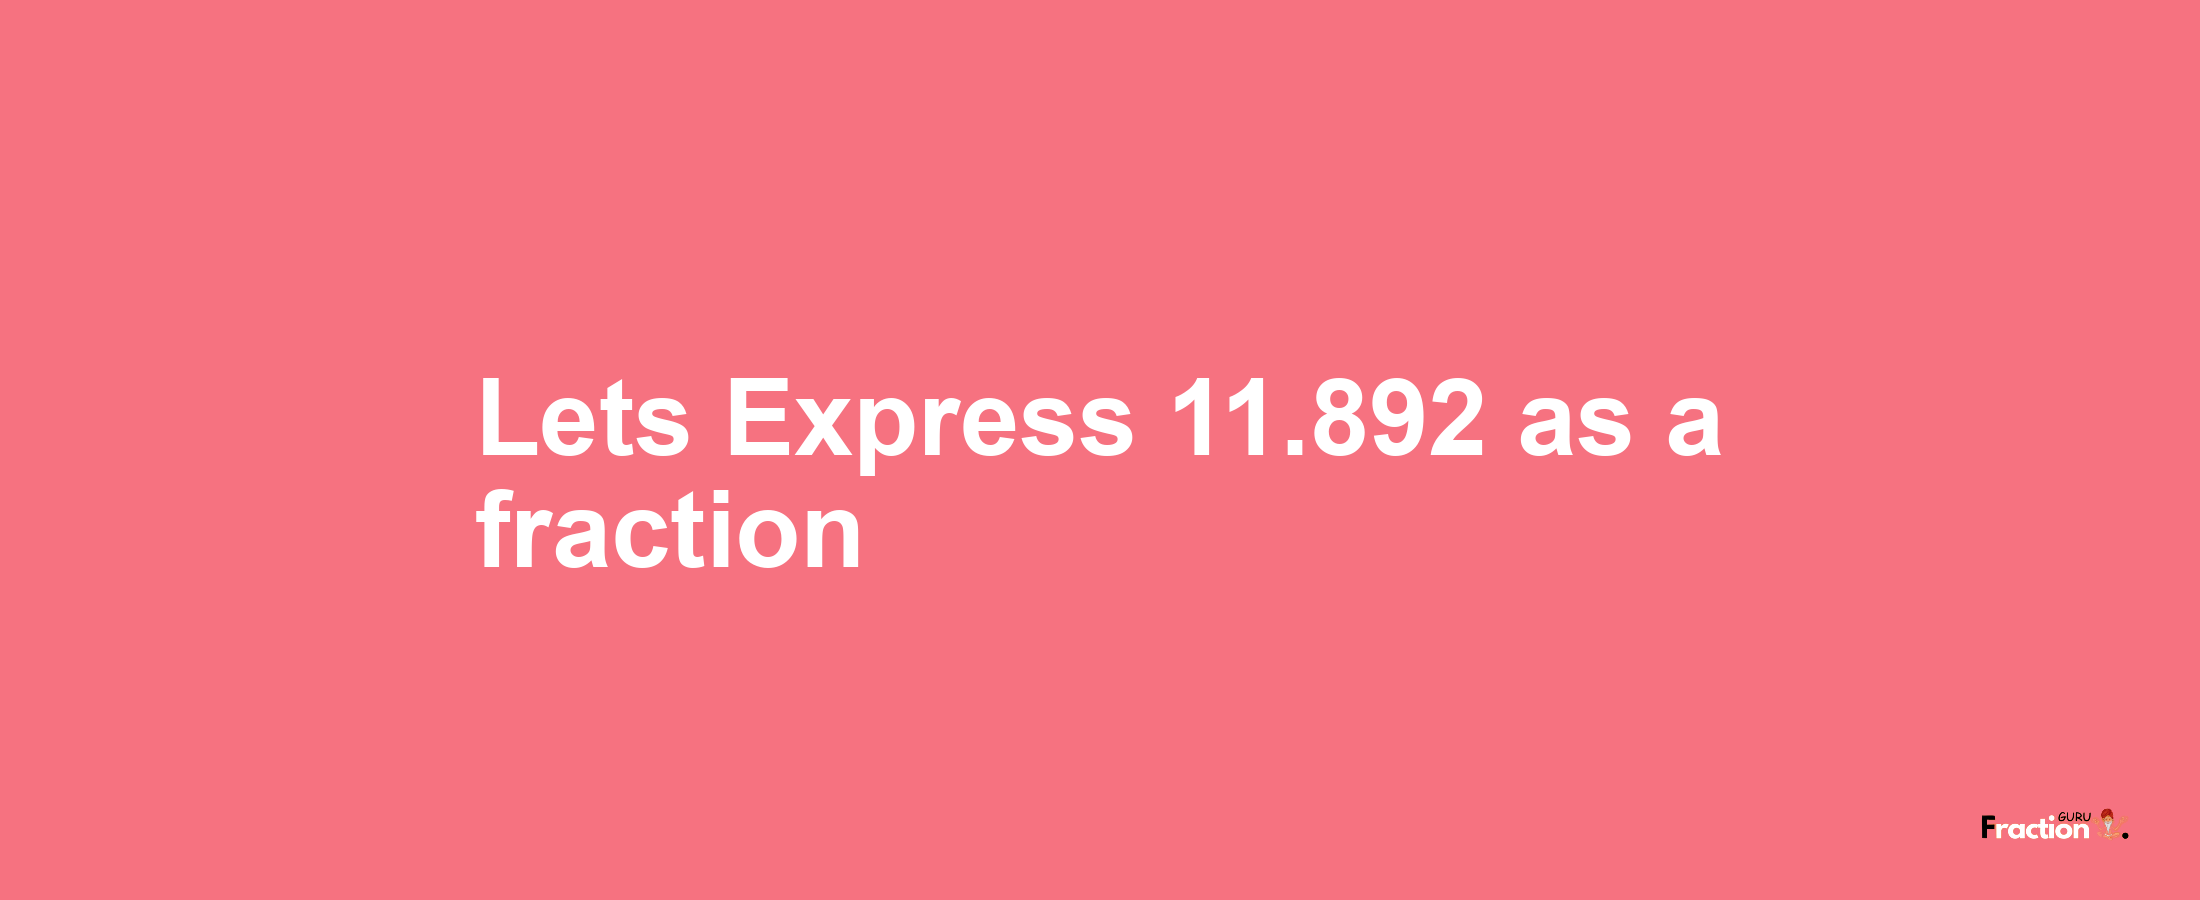 Lets Express 11.892 as afraction